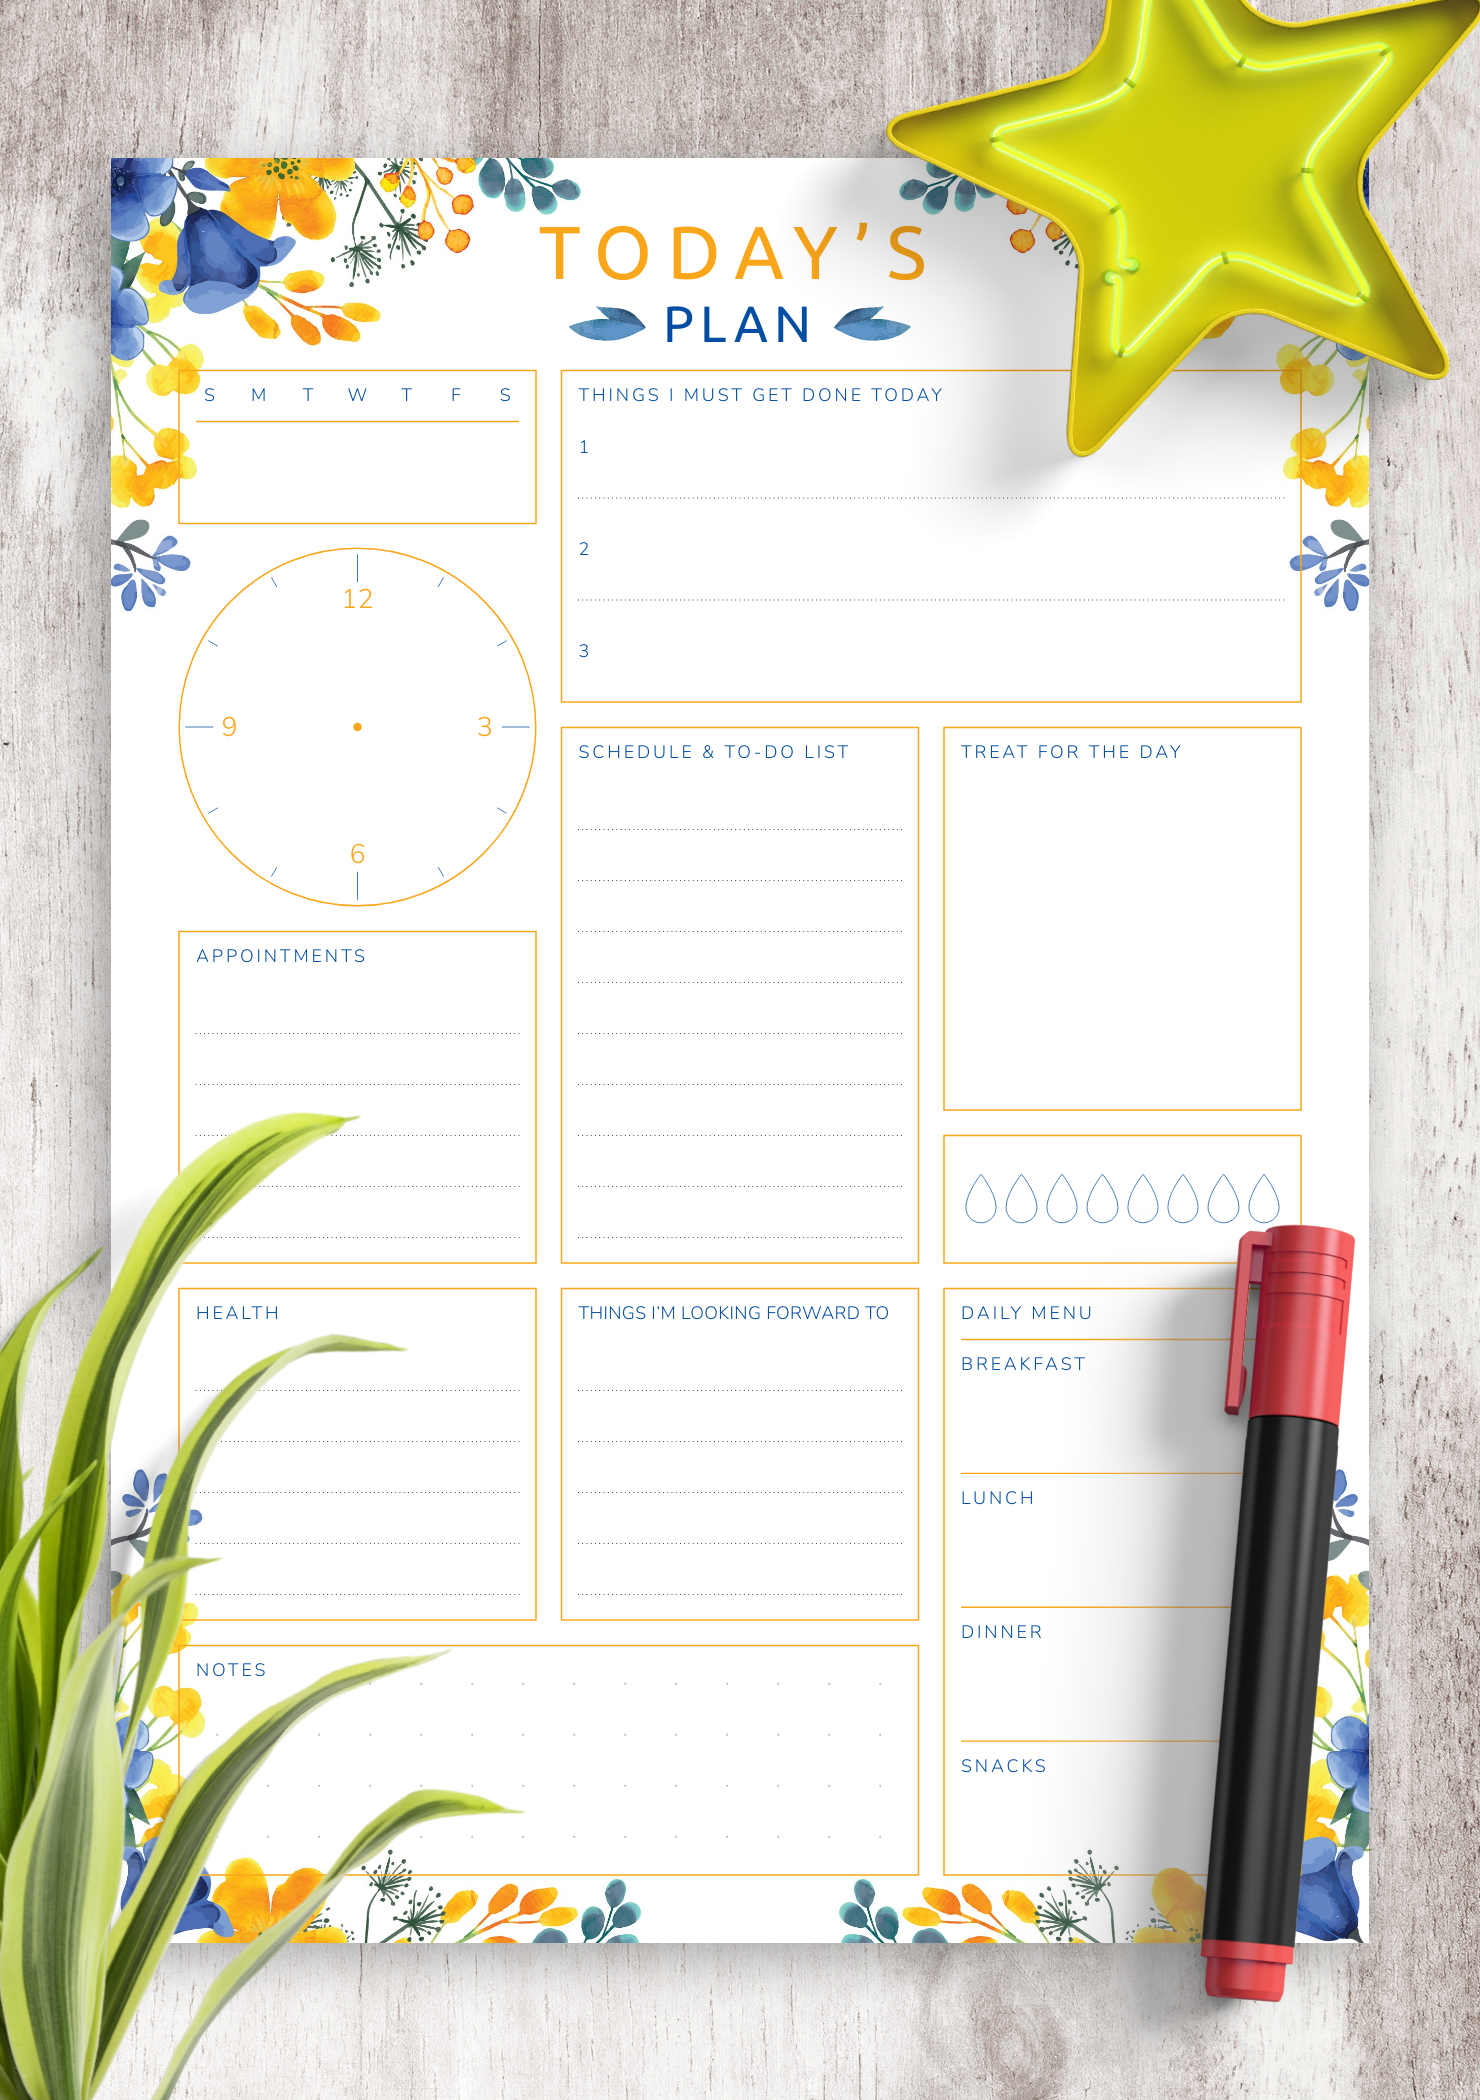 Download Printable Today's Plan with To Do List & Schedule PDF